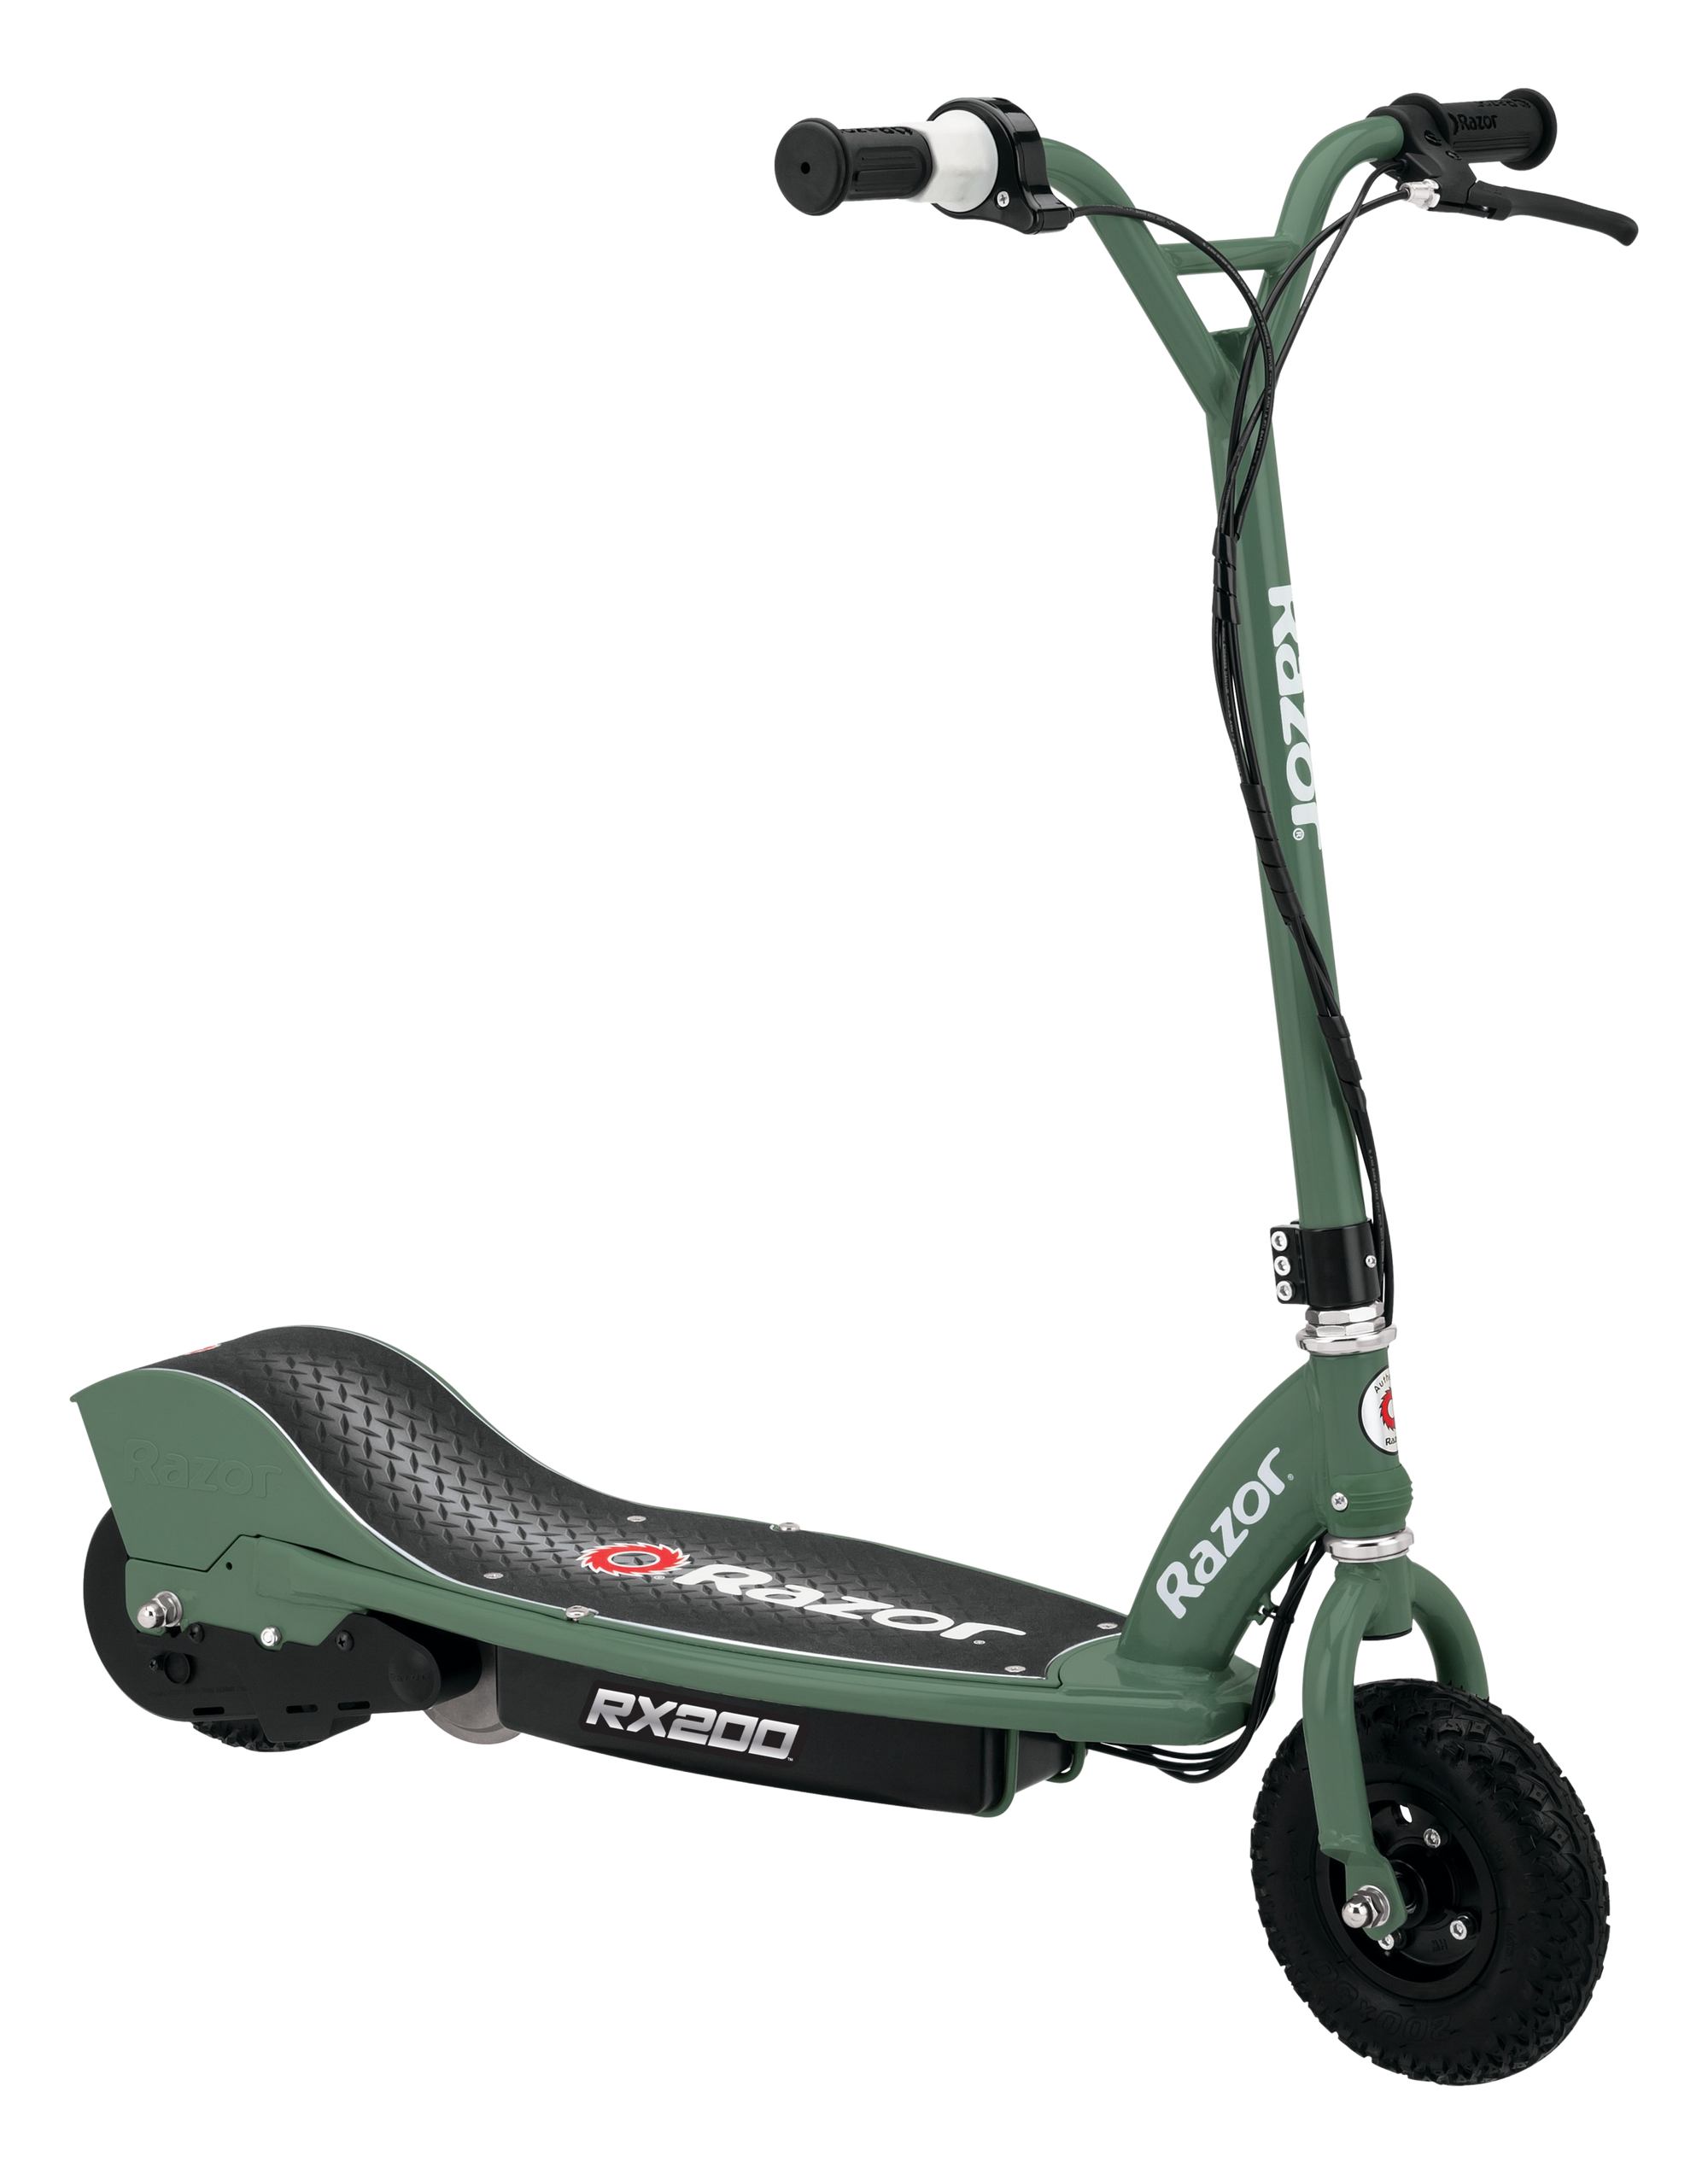 Razor RX200 Up to 8 Mile Range 12 MPH Heavy Duty Off Road Tires Electric Scooter Green New